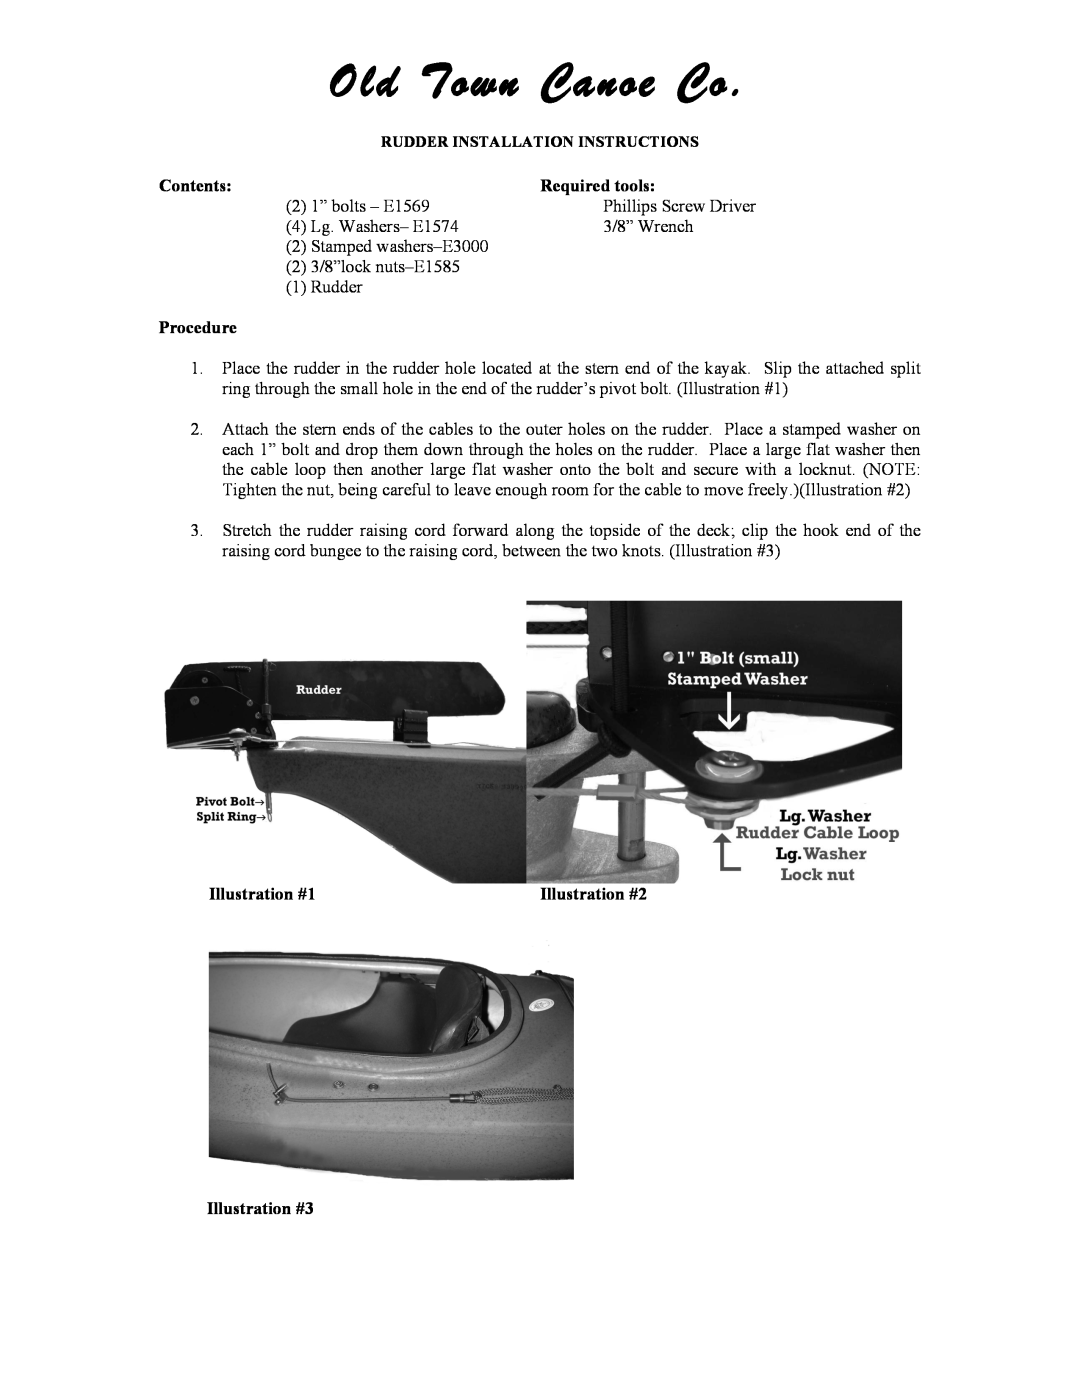 Old Town Canoe Co E3000 manual Old Town Canoe Co, Contents, Required tools, Procedure, Illustration #1, Illustration #2 